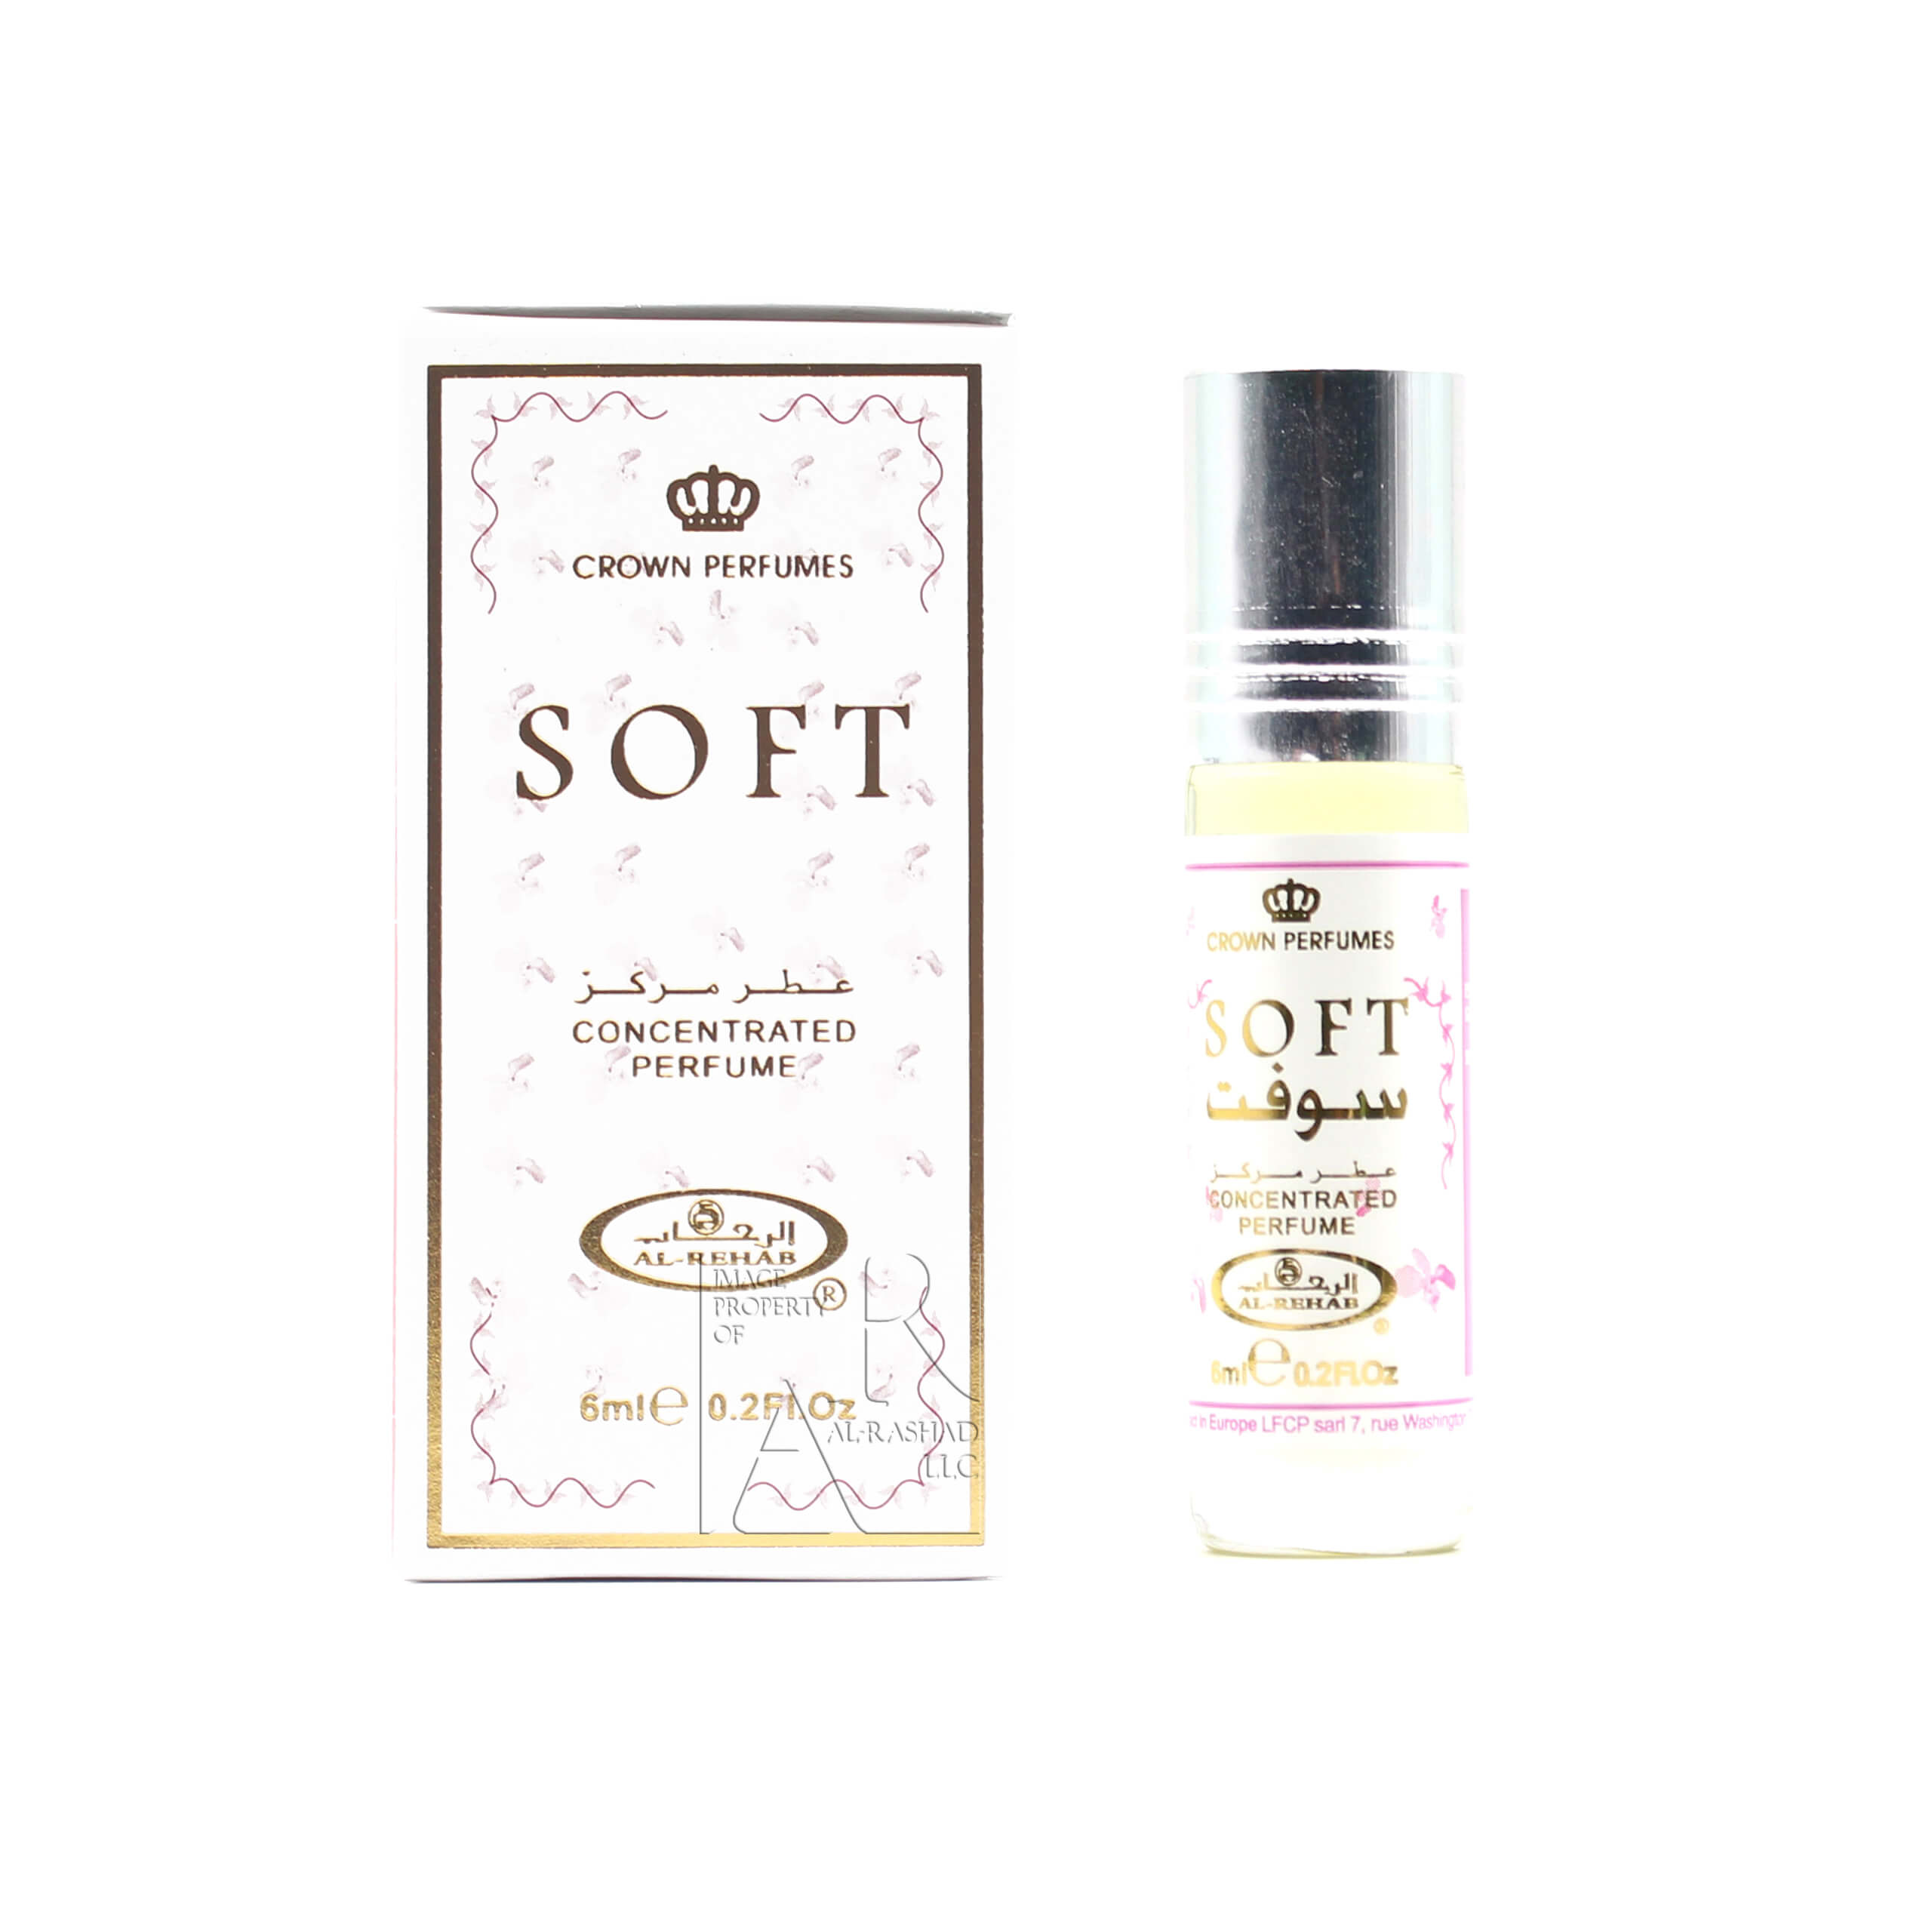 Golden Sand Concentrated Perfume Oil by Al-Rehab 6 ml Roll-on